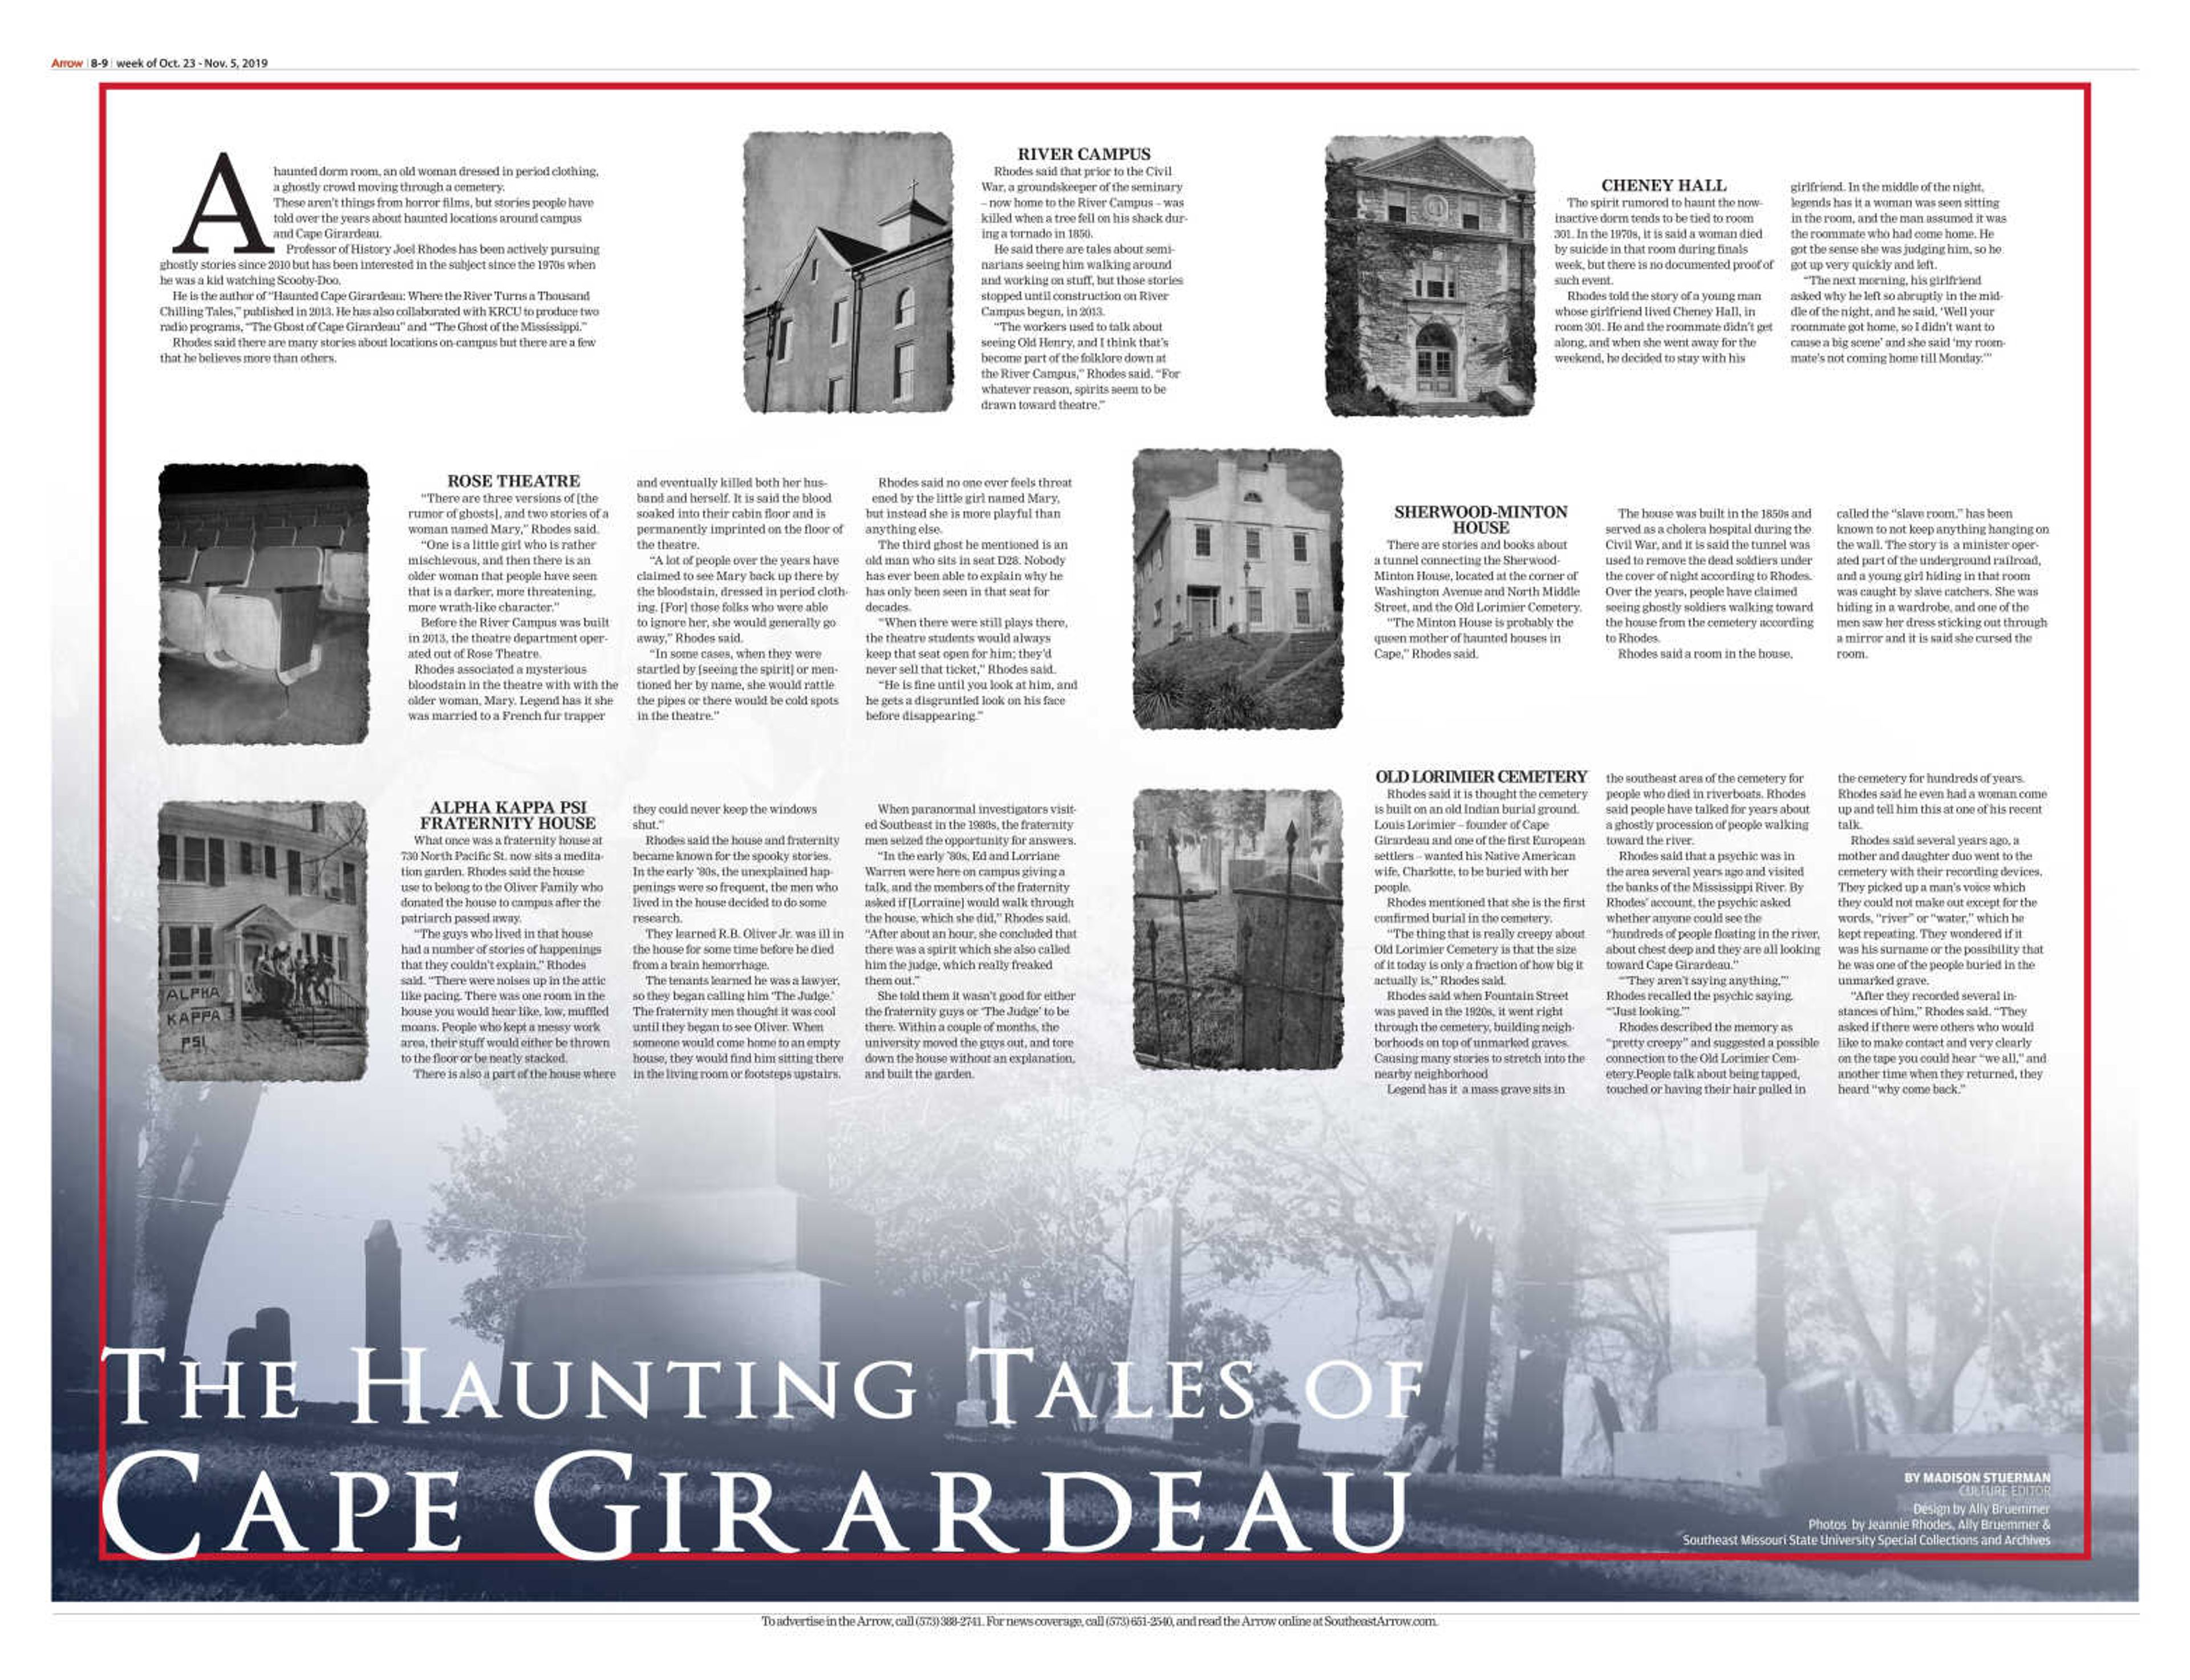 The haunting tales of Cape Girardeau